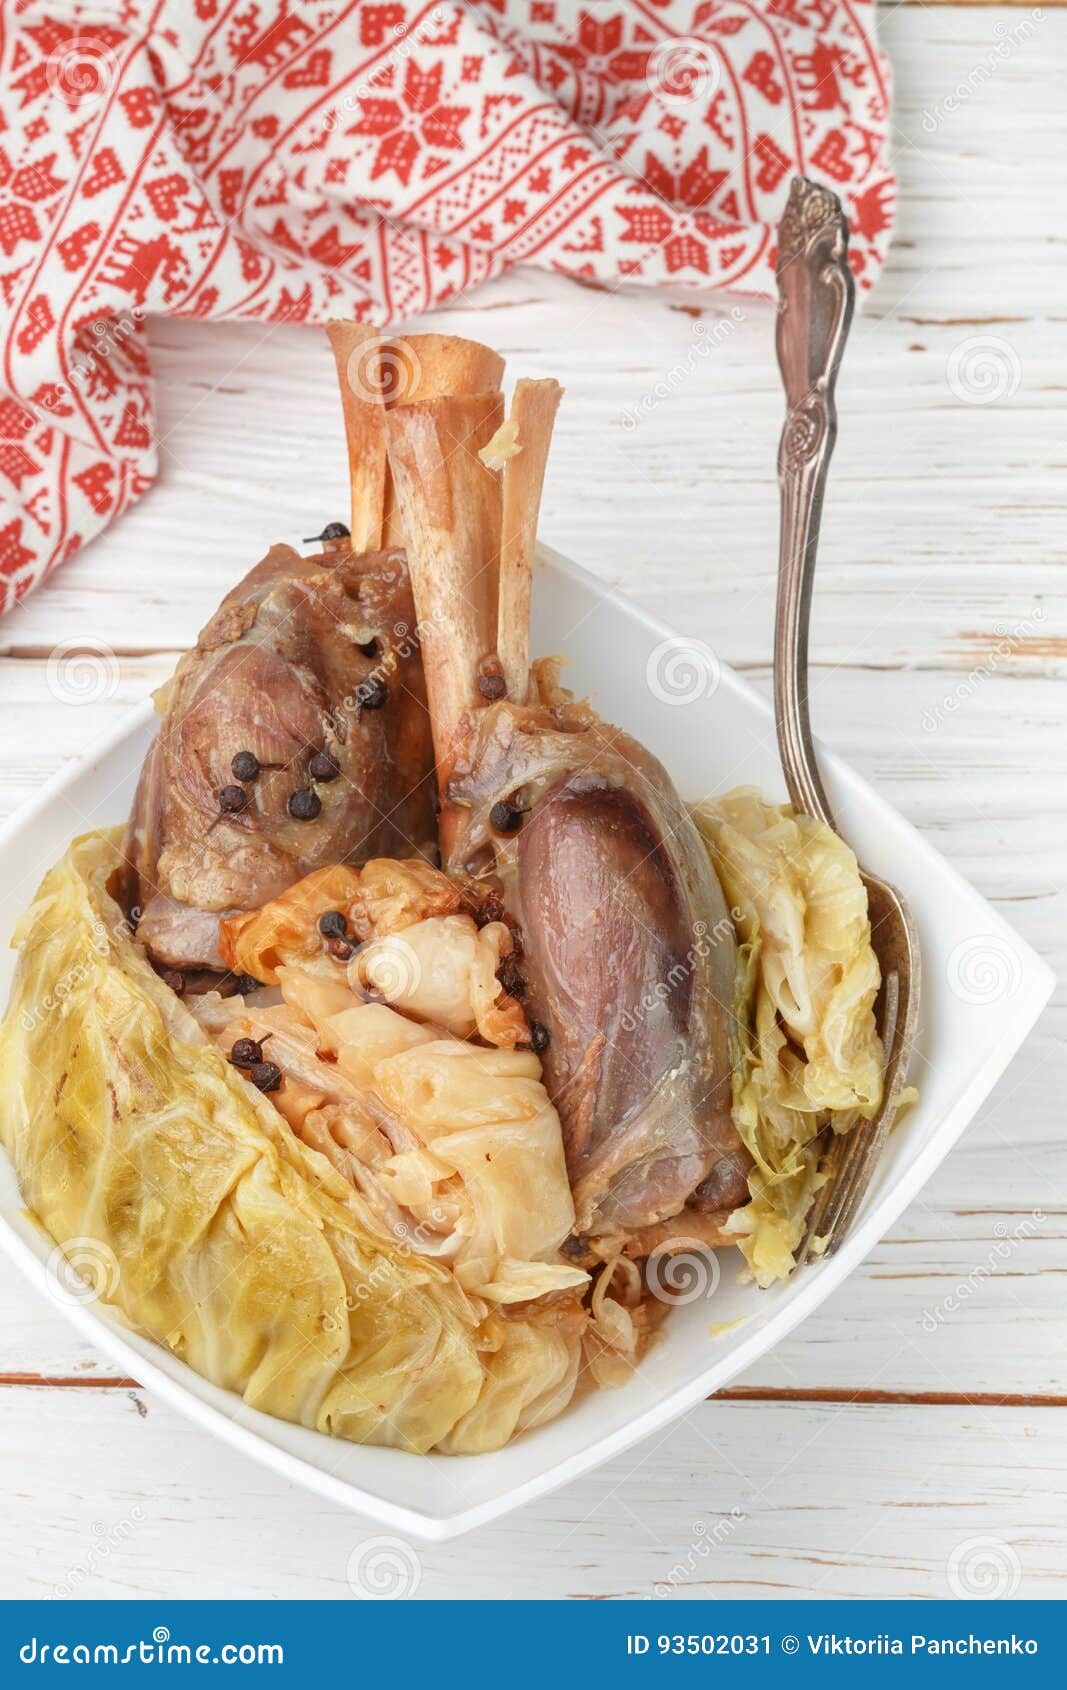 Lamb Stewed with Cabbage and Black Pepper Stock Image - Image of autumn ...